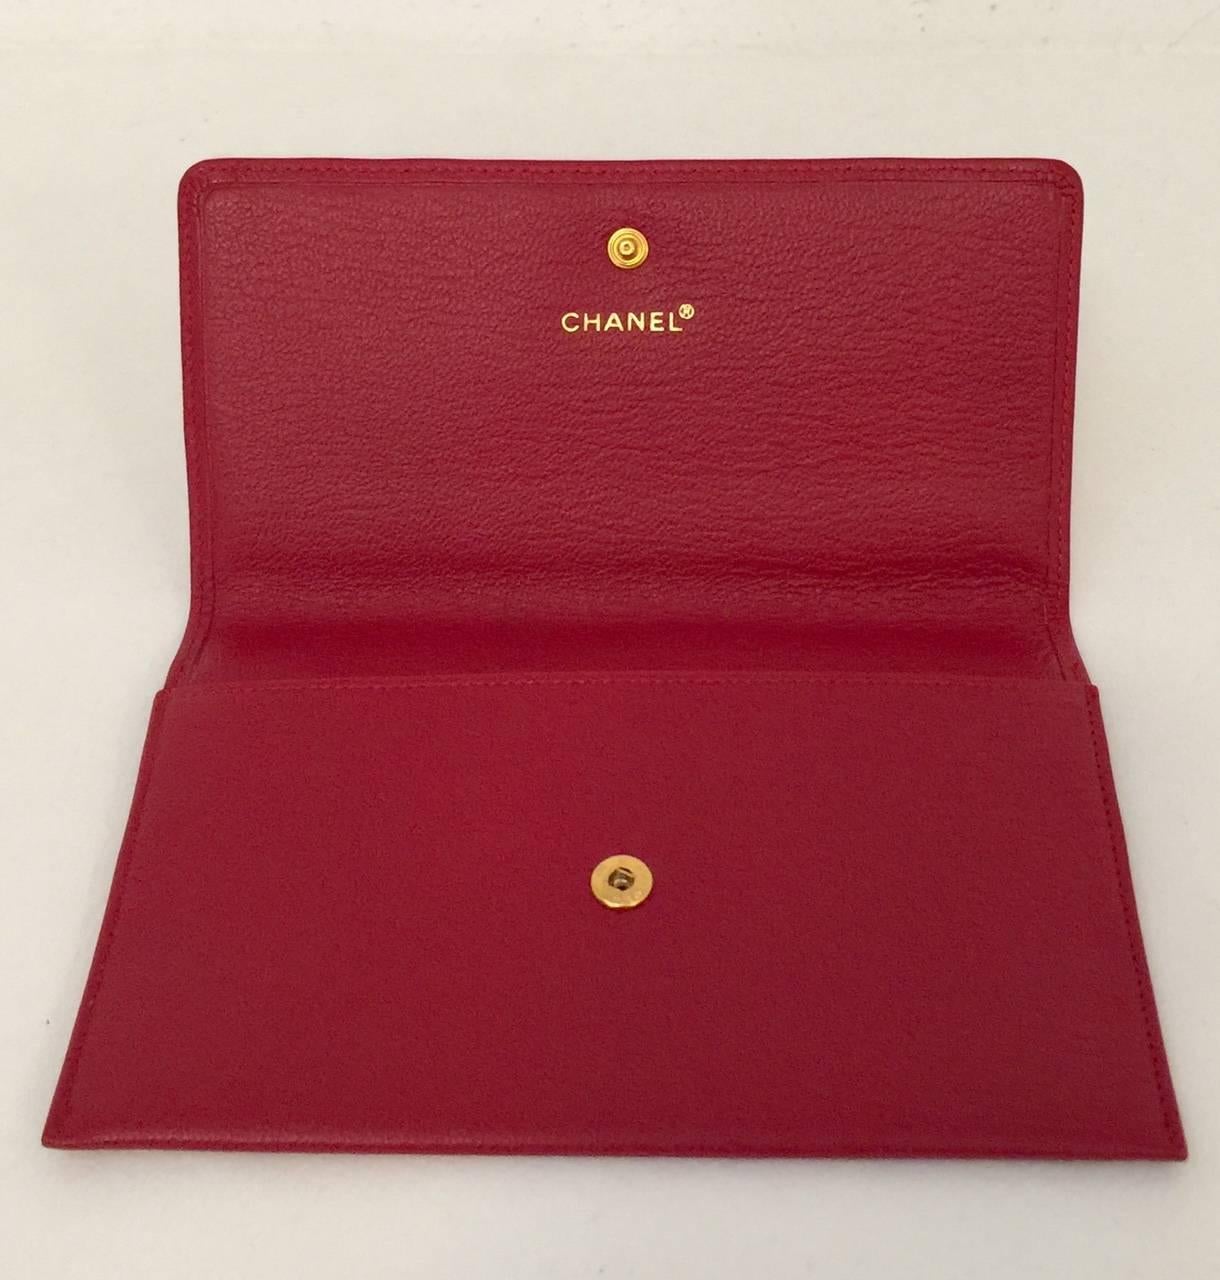 Deep Red Leather Pochette proves that Chanel is so much more than diamond-quilted bags and accessories!  Features supple leather in signature deep red and snap closure with renowned double 